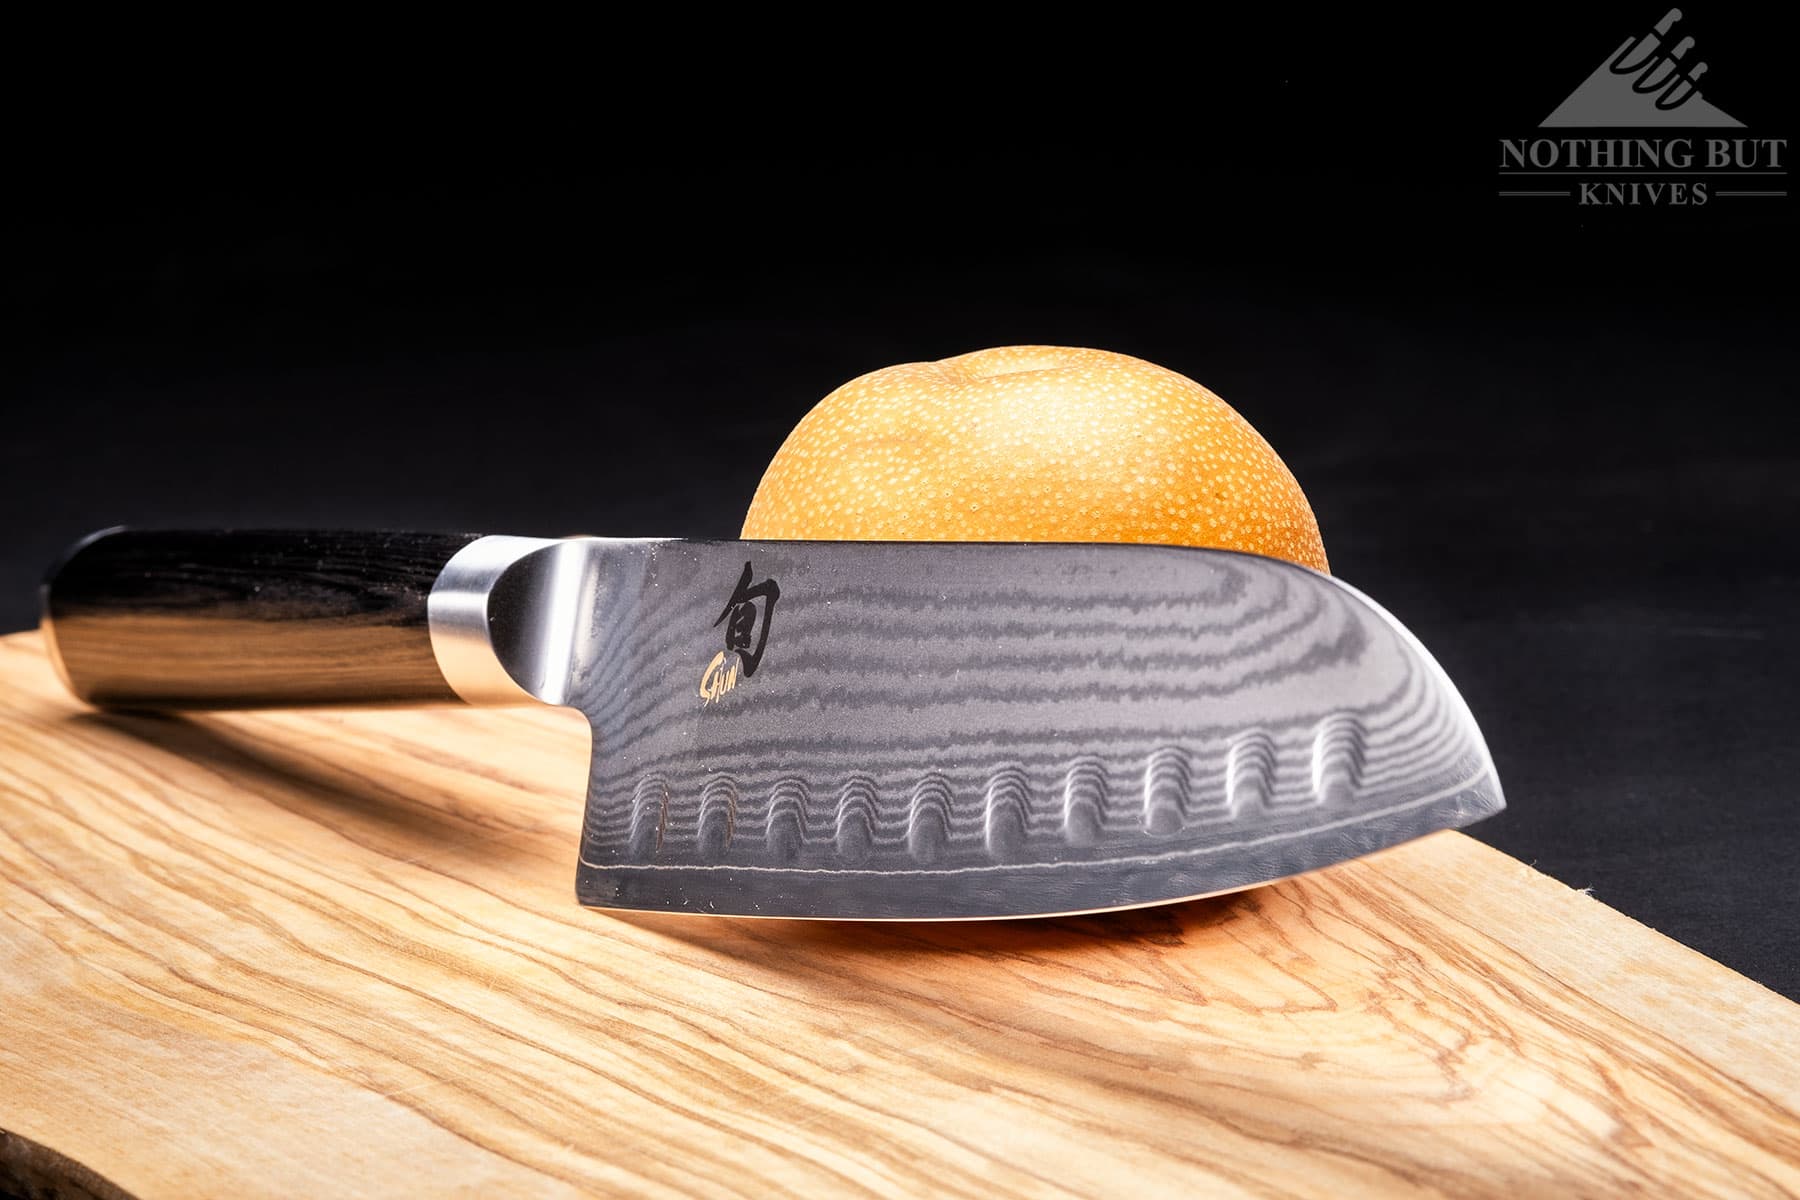 The Shun Classic Santoku knife leaning against an Asian pear on a wood cutting board.